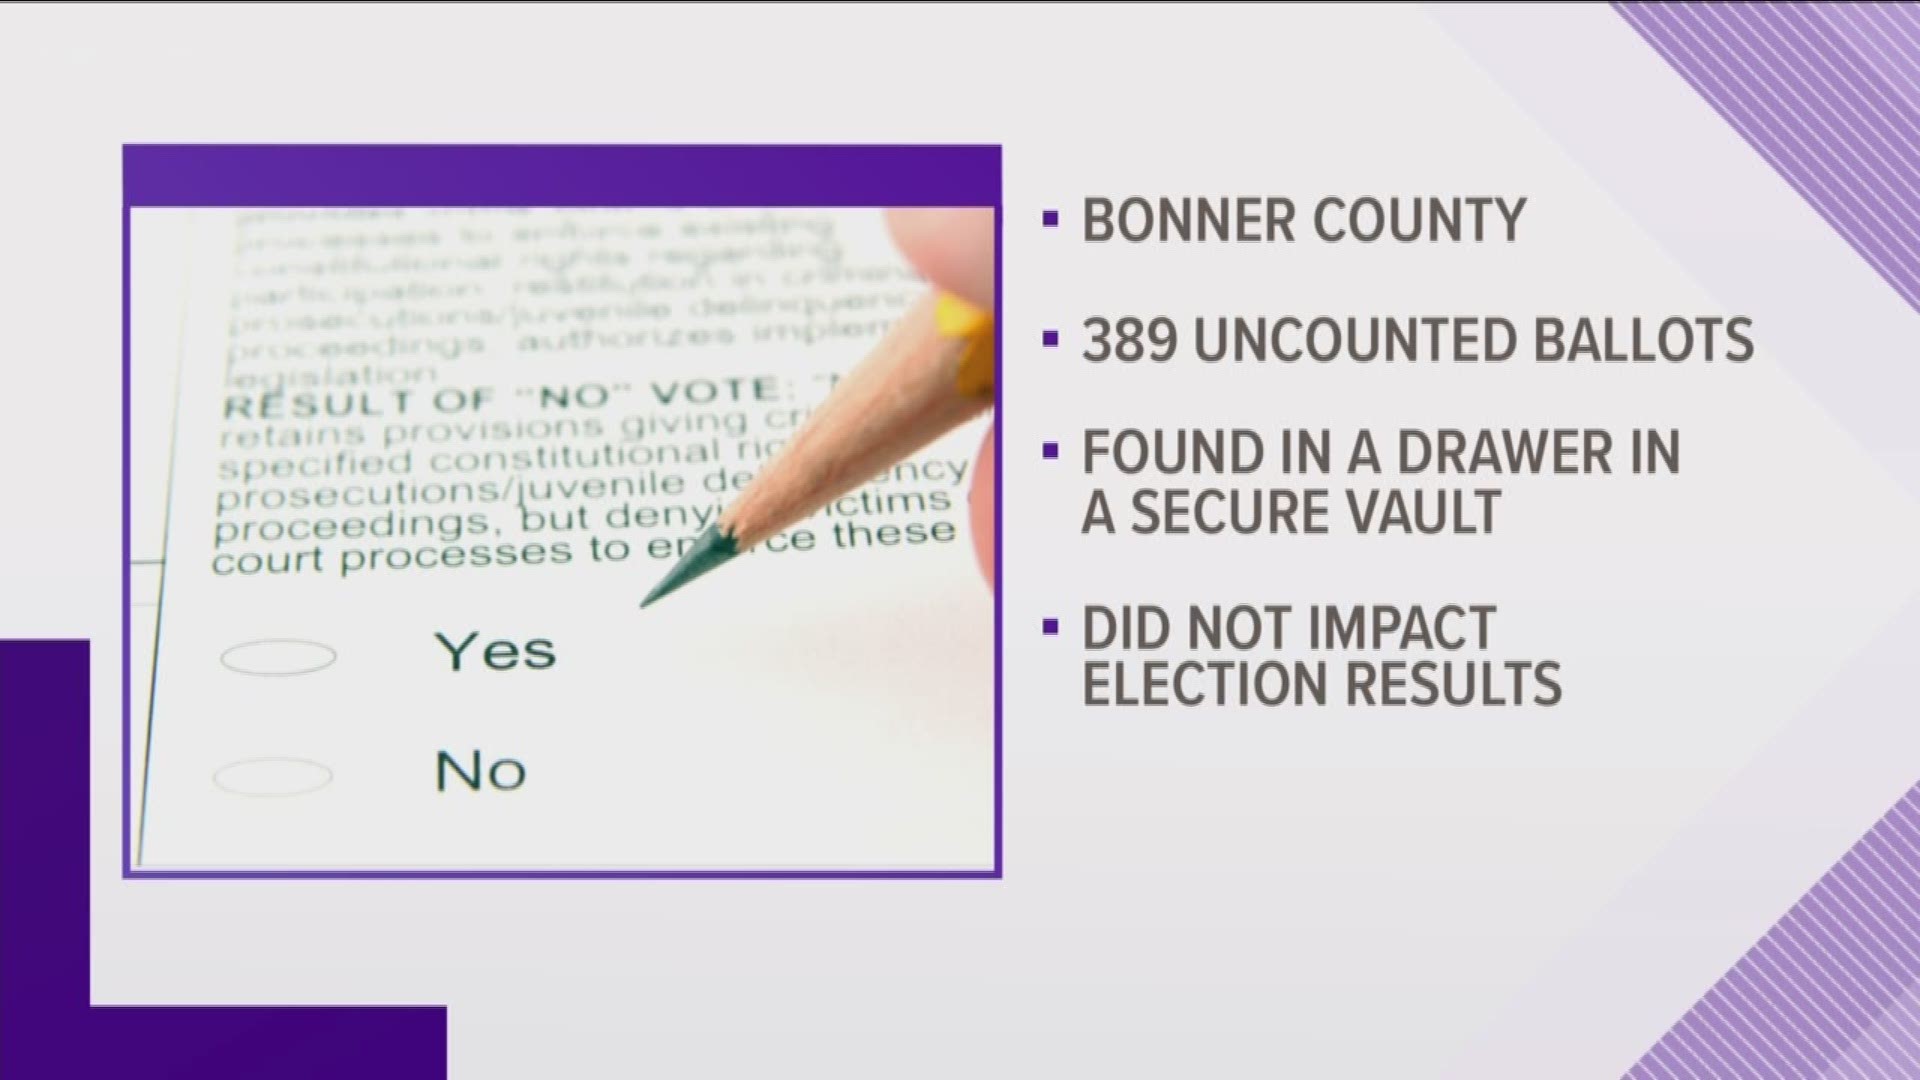 Nearly 400 Bonner County election ballots went uncounted